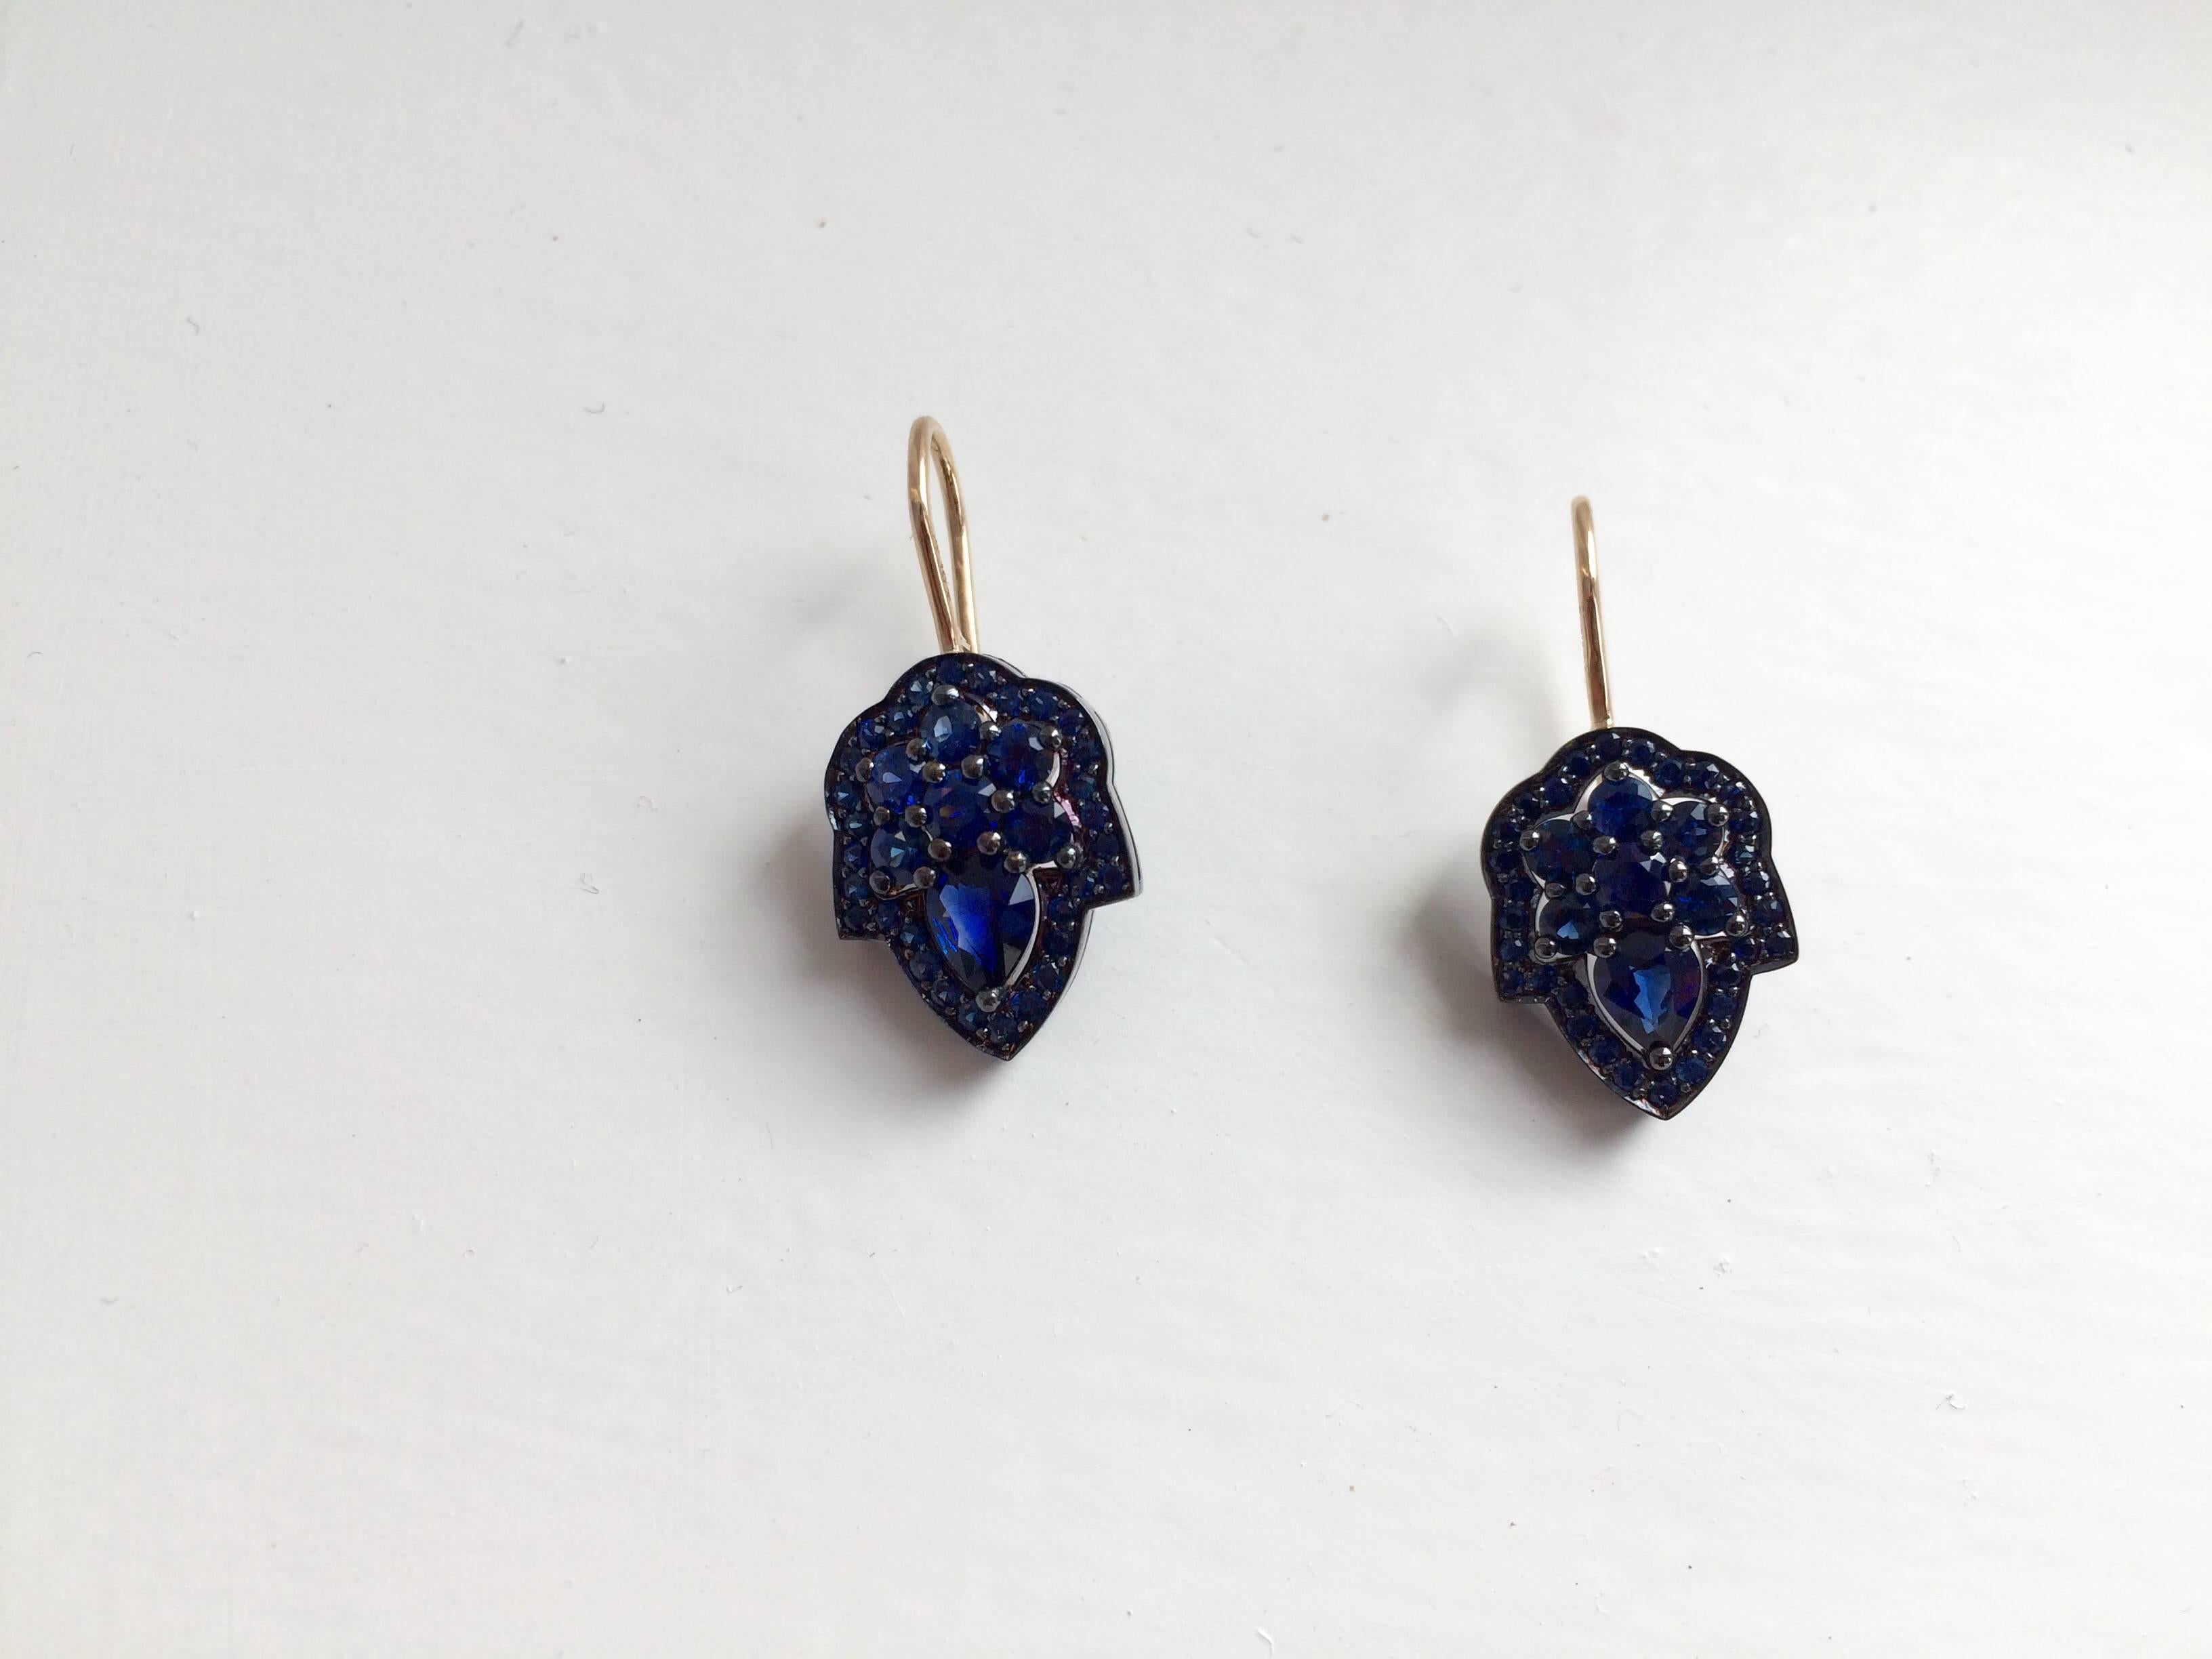 These earrings have been handcrafted in London from 18ct yellow gold and are set with 2.50ct of blue sapphires. The top and sides of the drops have been finished with a blue gold lacquer to enhance the electric blue colour of the sapphires.

Width